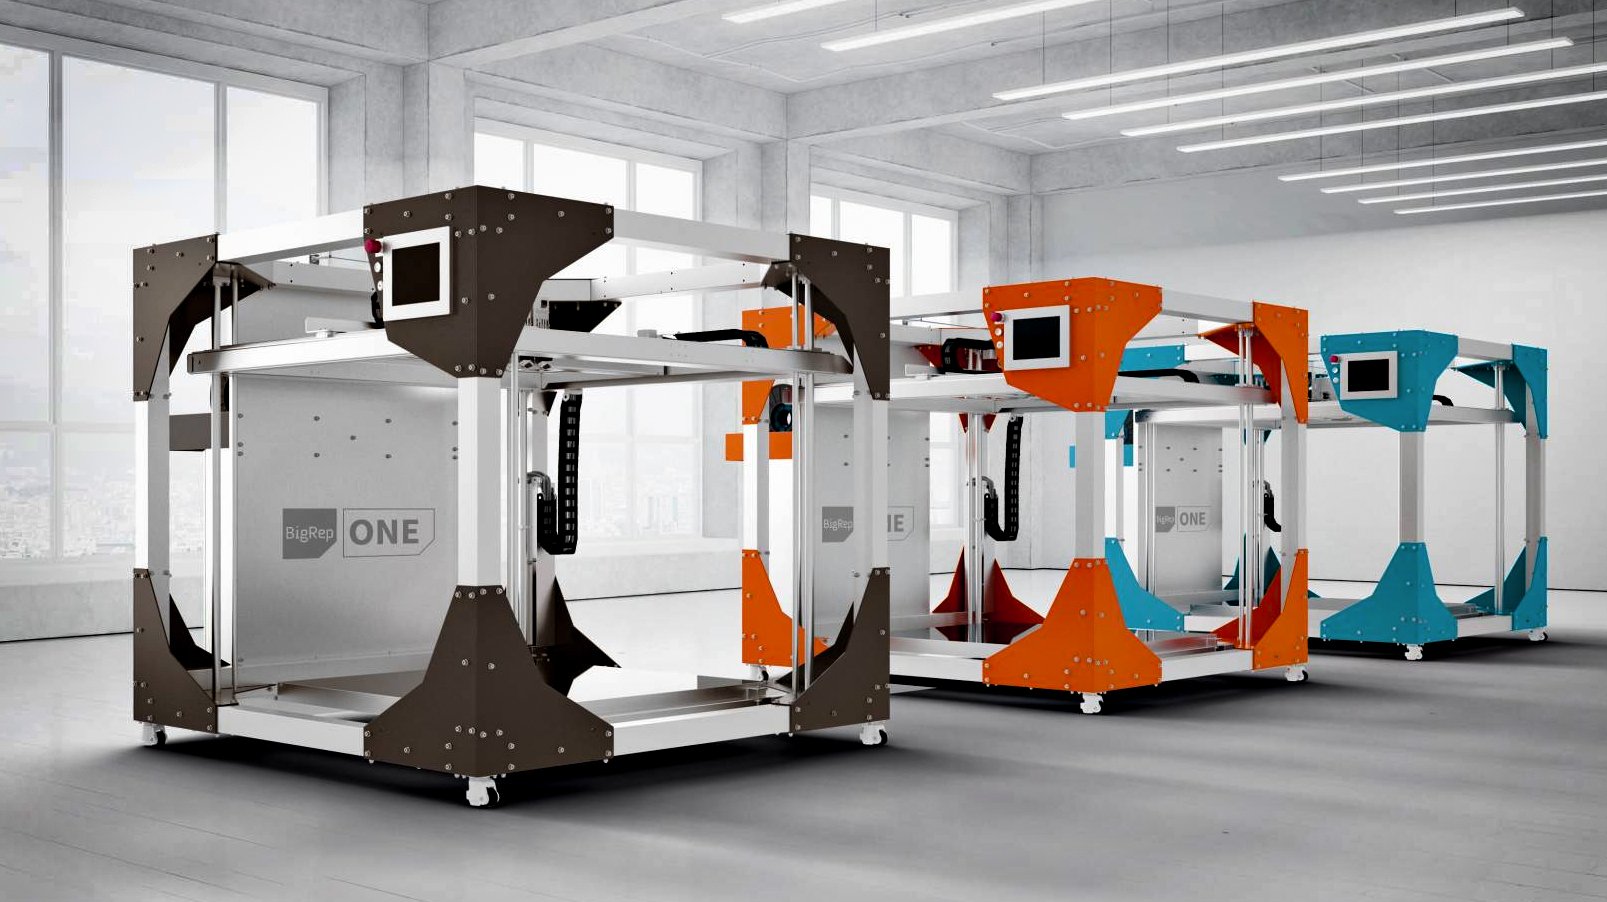 The 10 Best Large 3D Printing Services in 2023 - BigRep One Printers